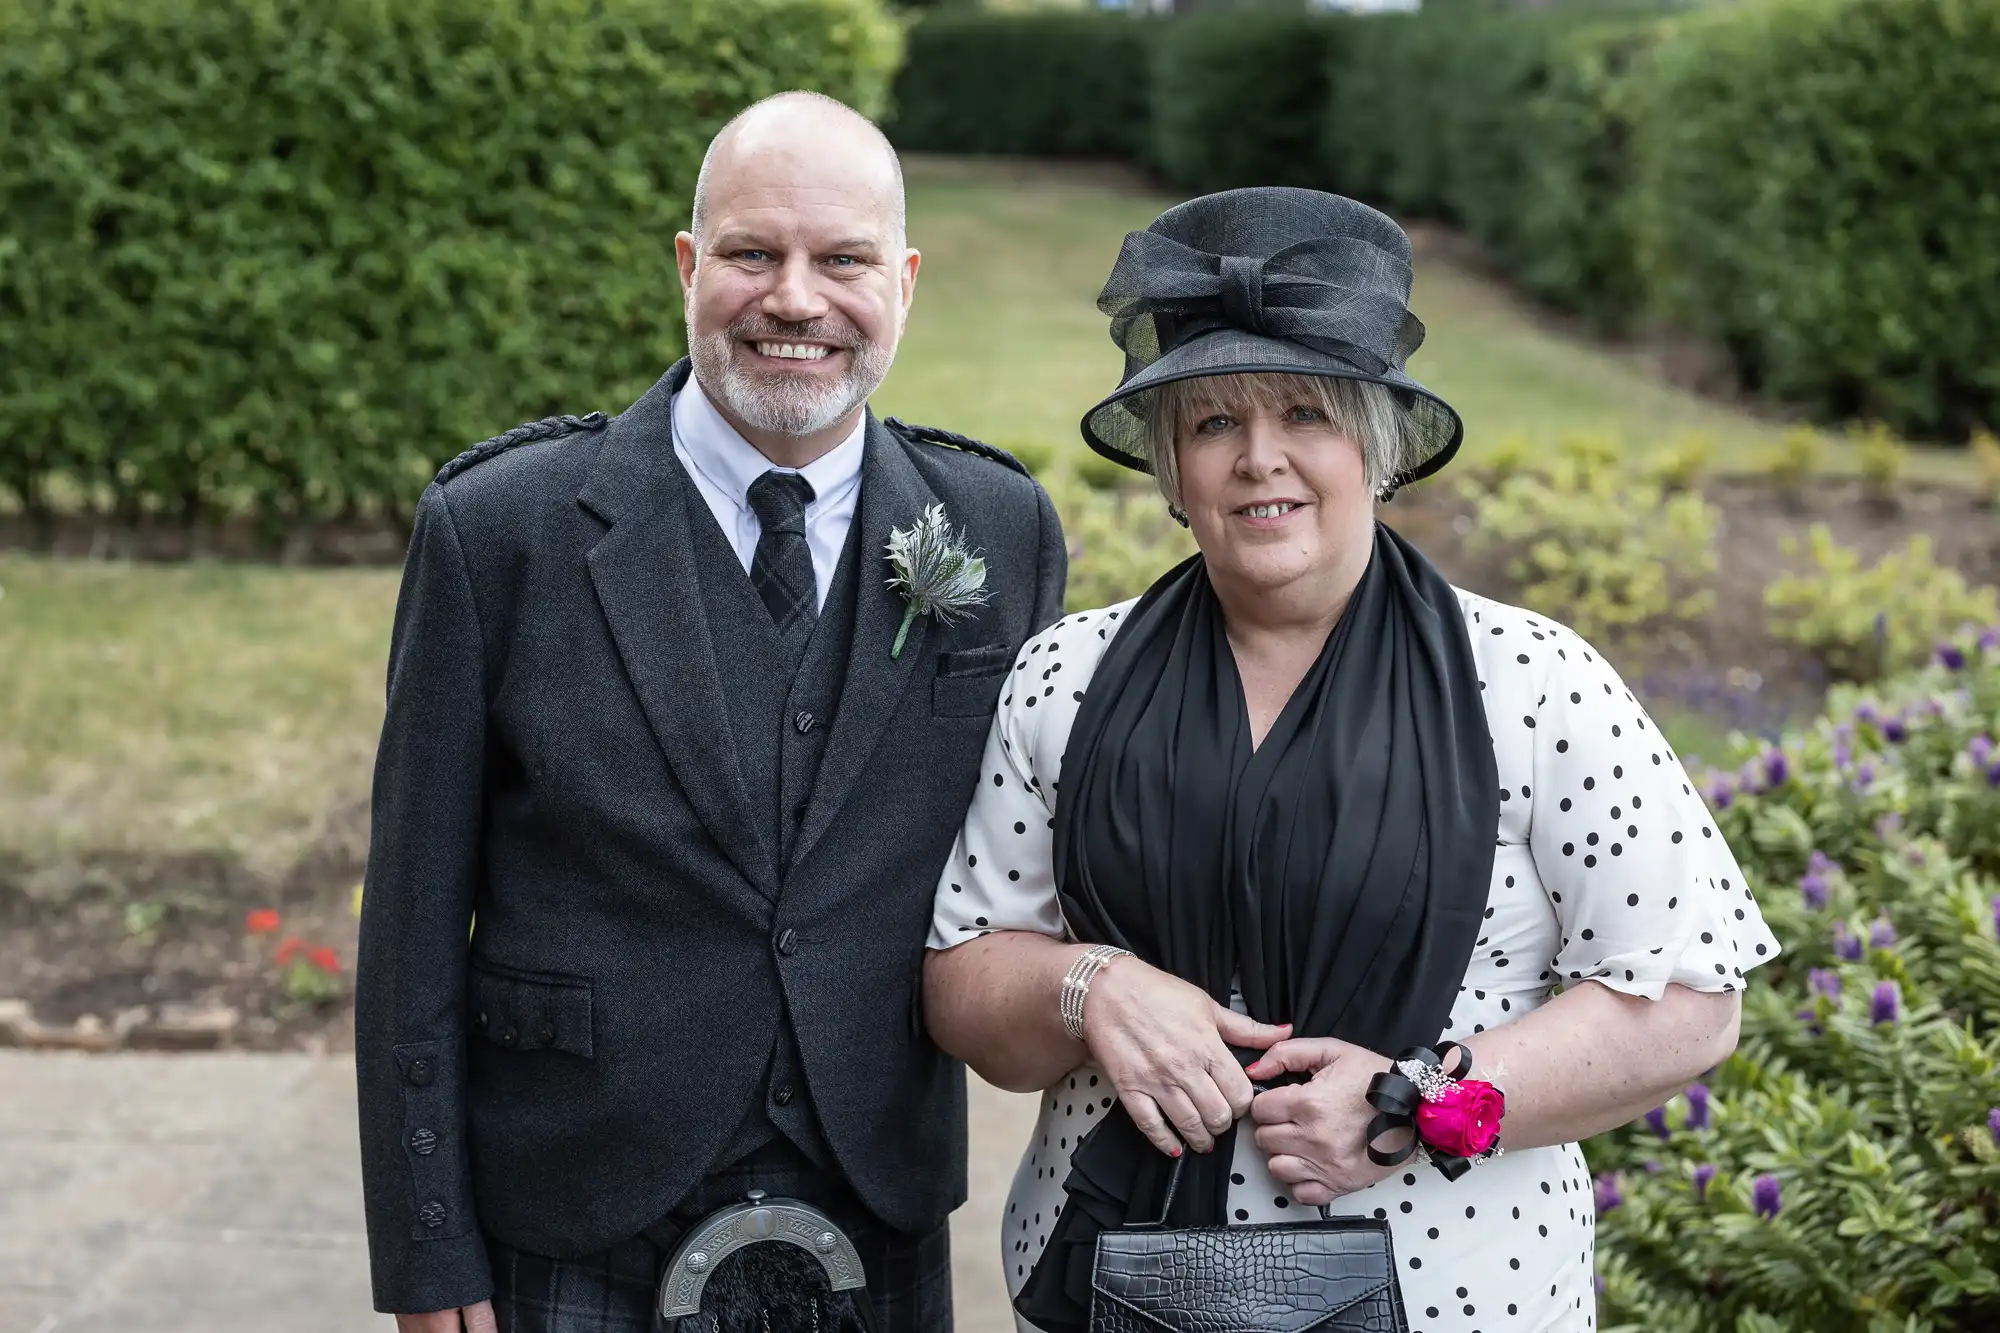 A man in a kilt and a woman in a black and white dress with hats, smiling in a garden at a formal event.